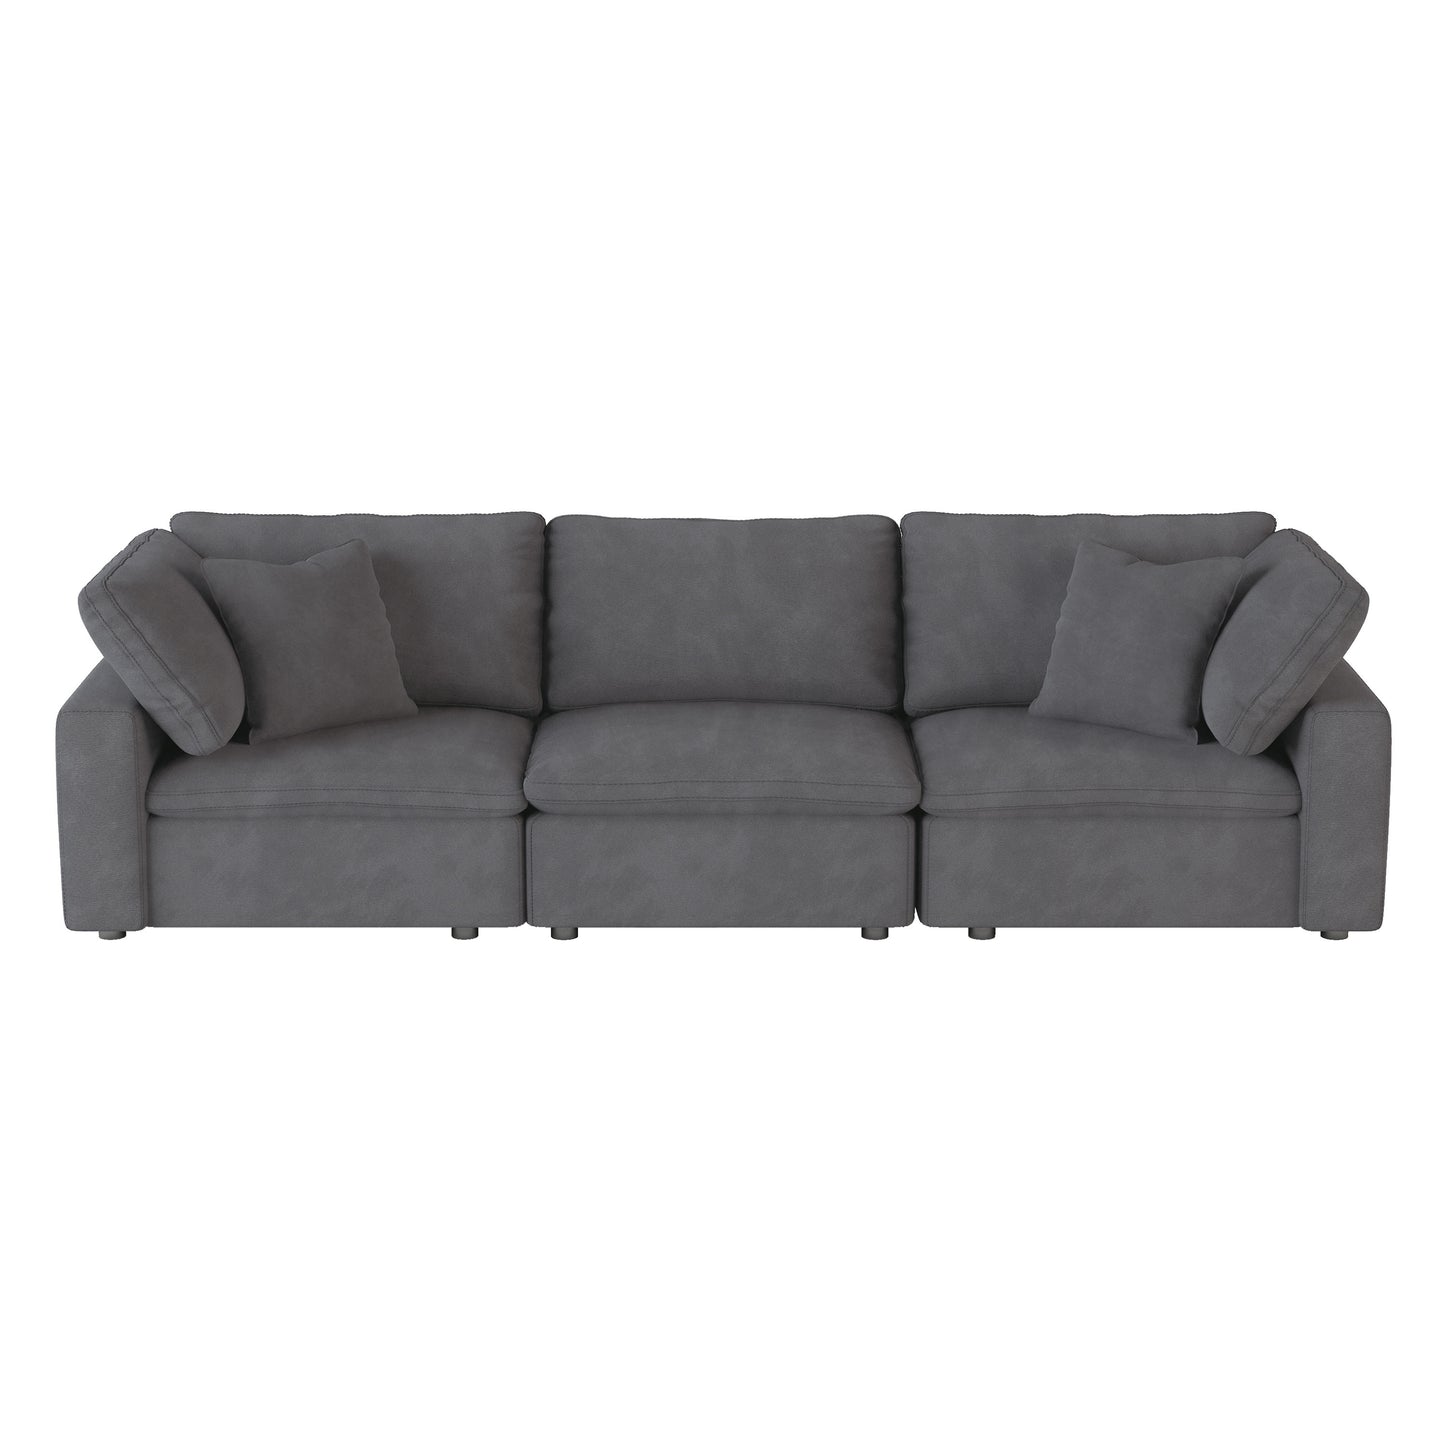 Guthrie Feather Down XL Sofa GREY MICROFIBER ONLY